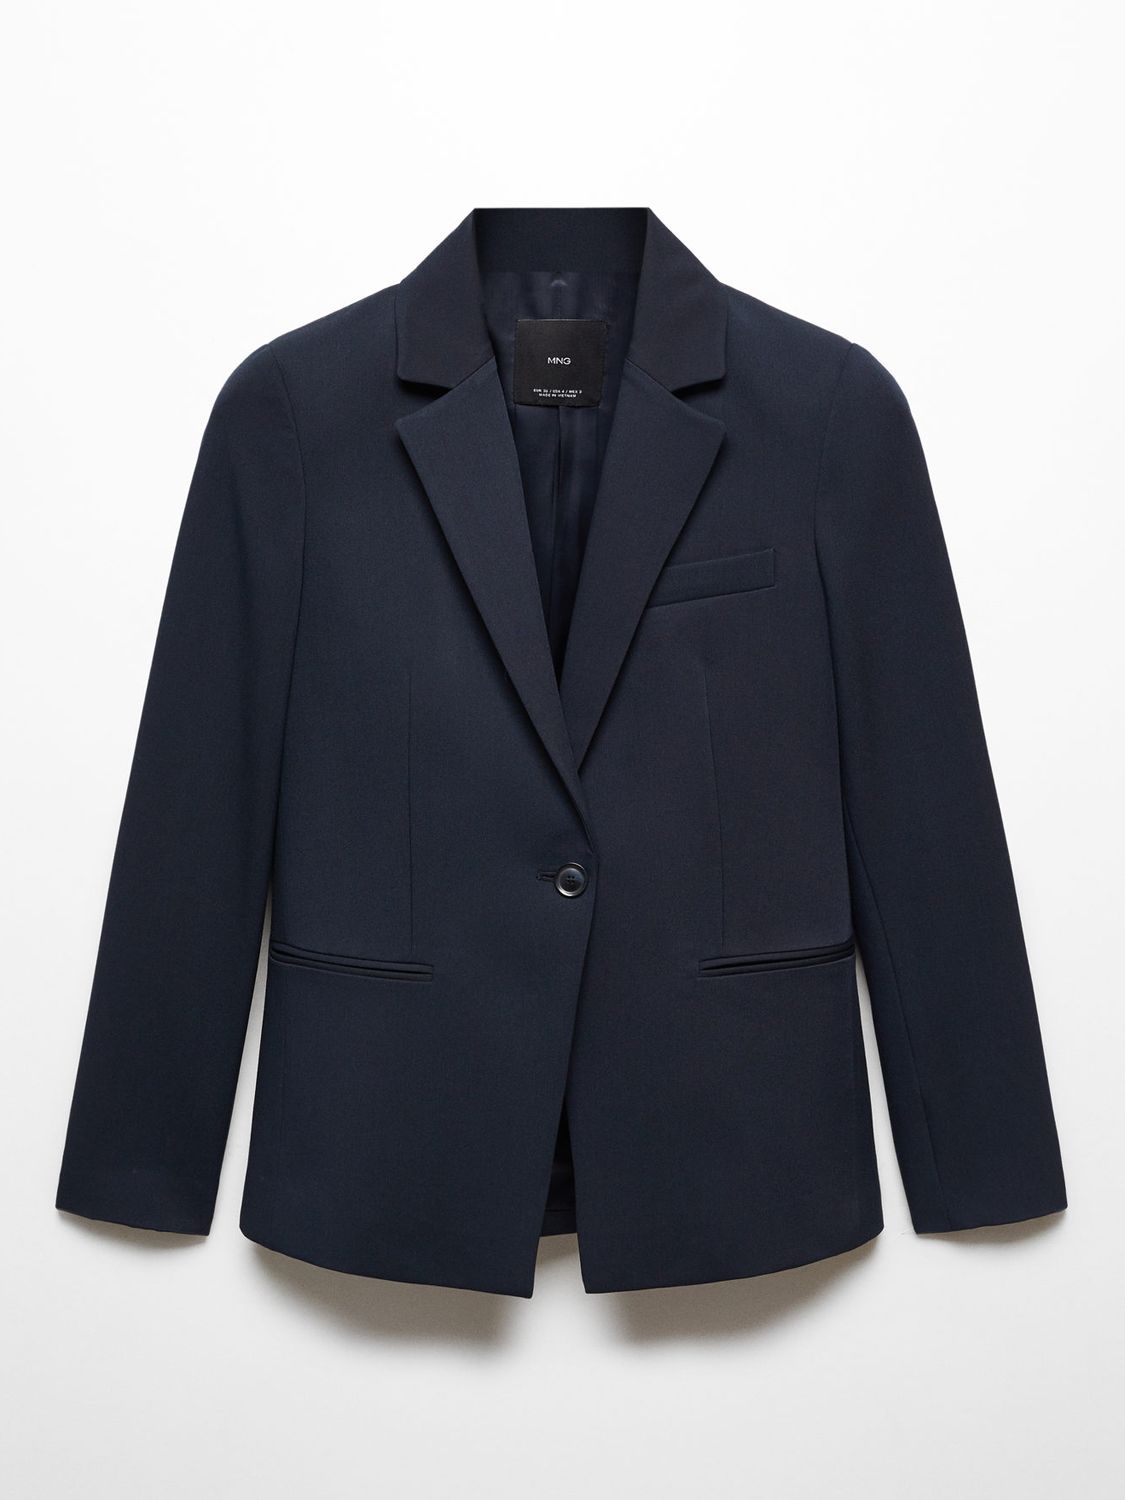 Buy Mango Boreal Fitted Suit Jacket Online at johnlewis.com